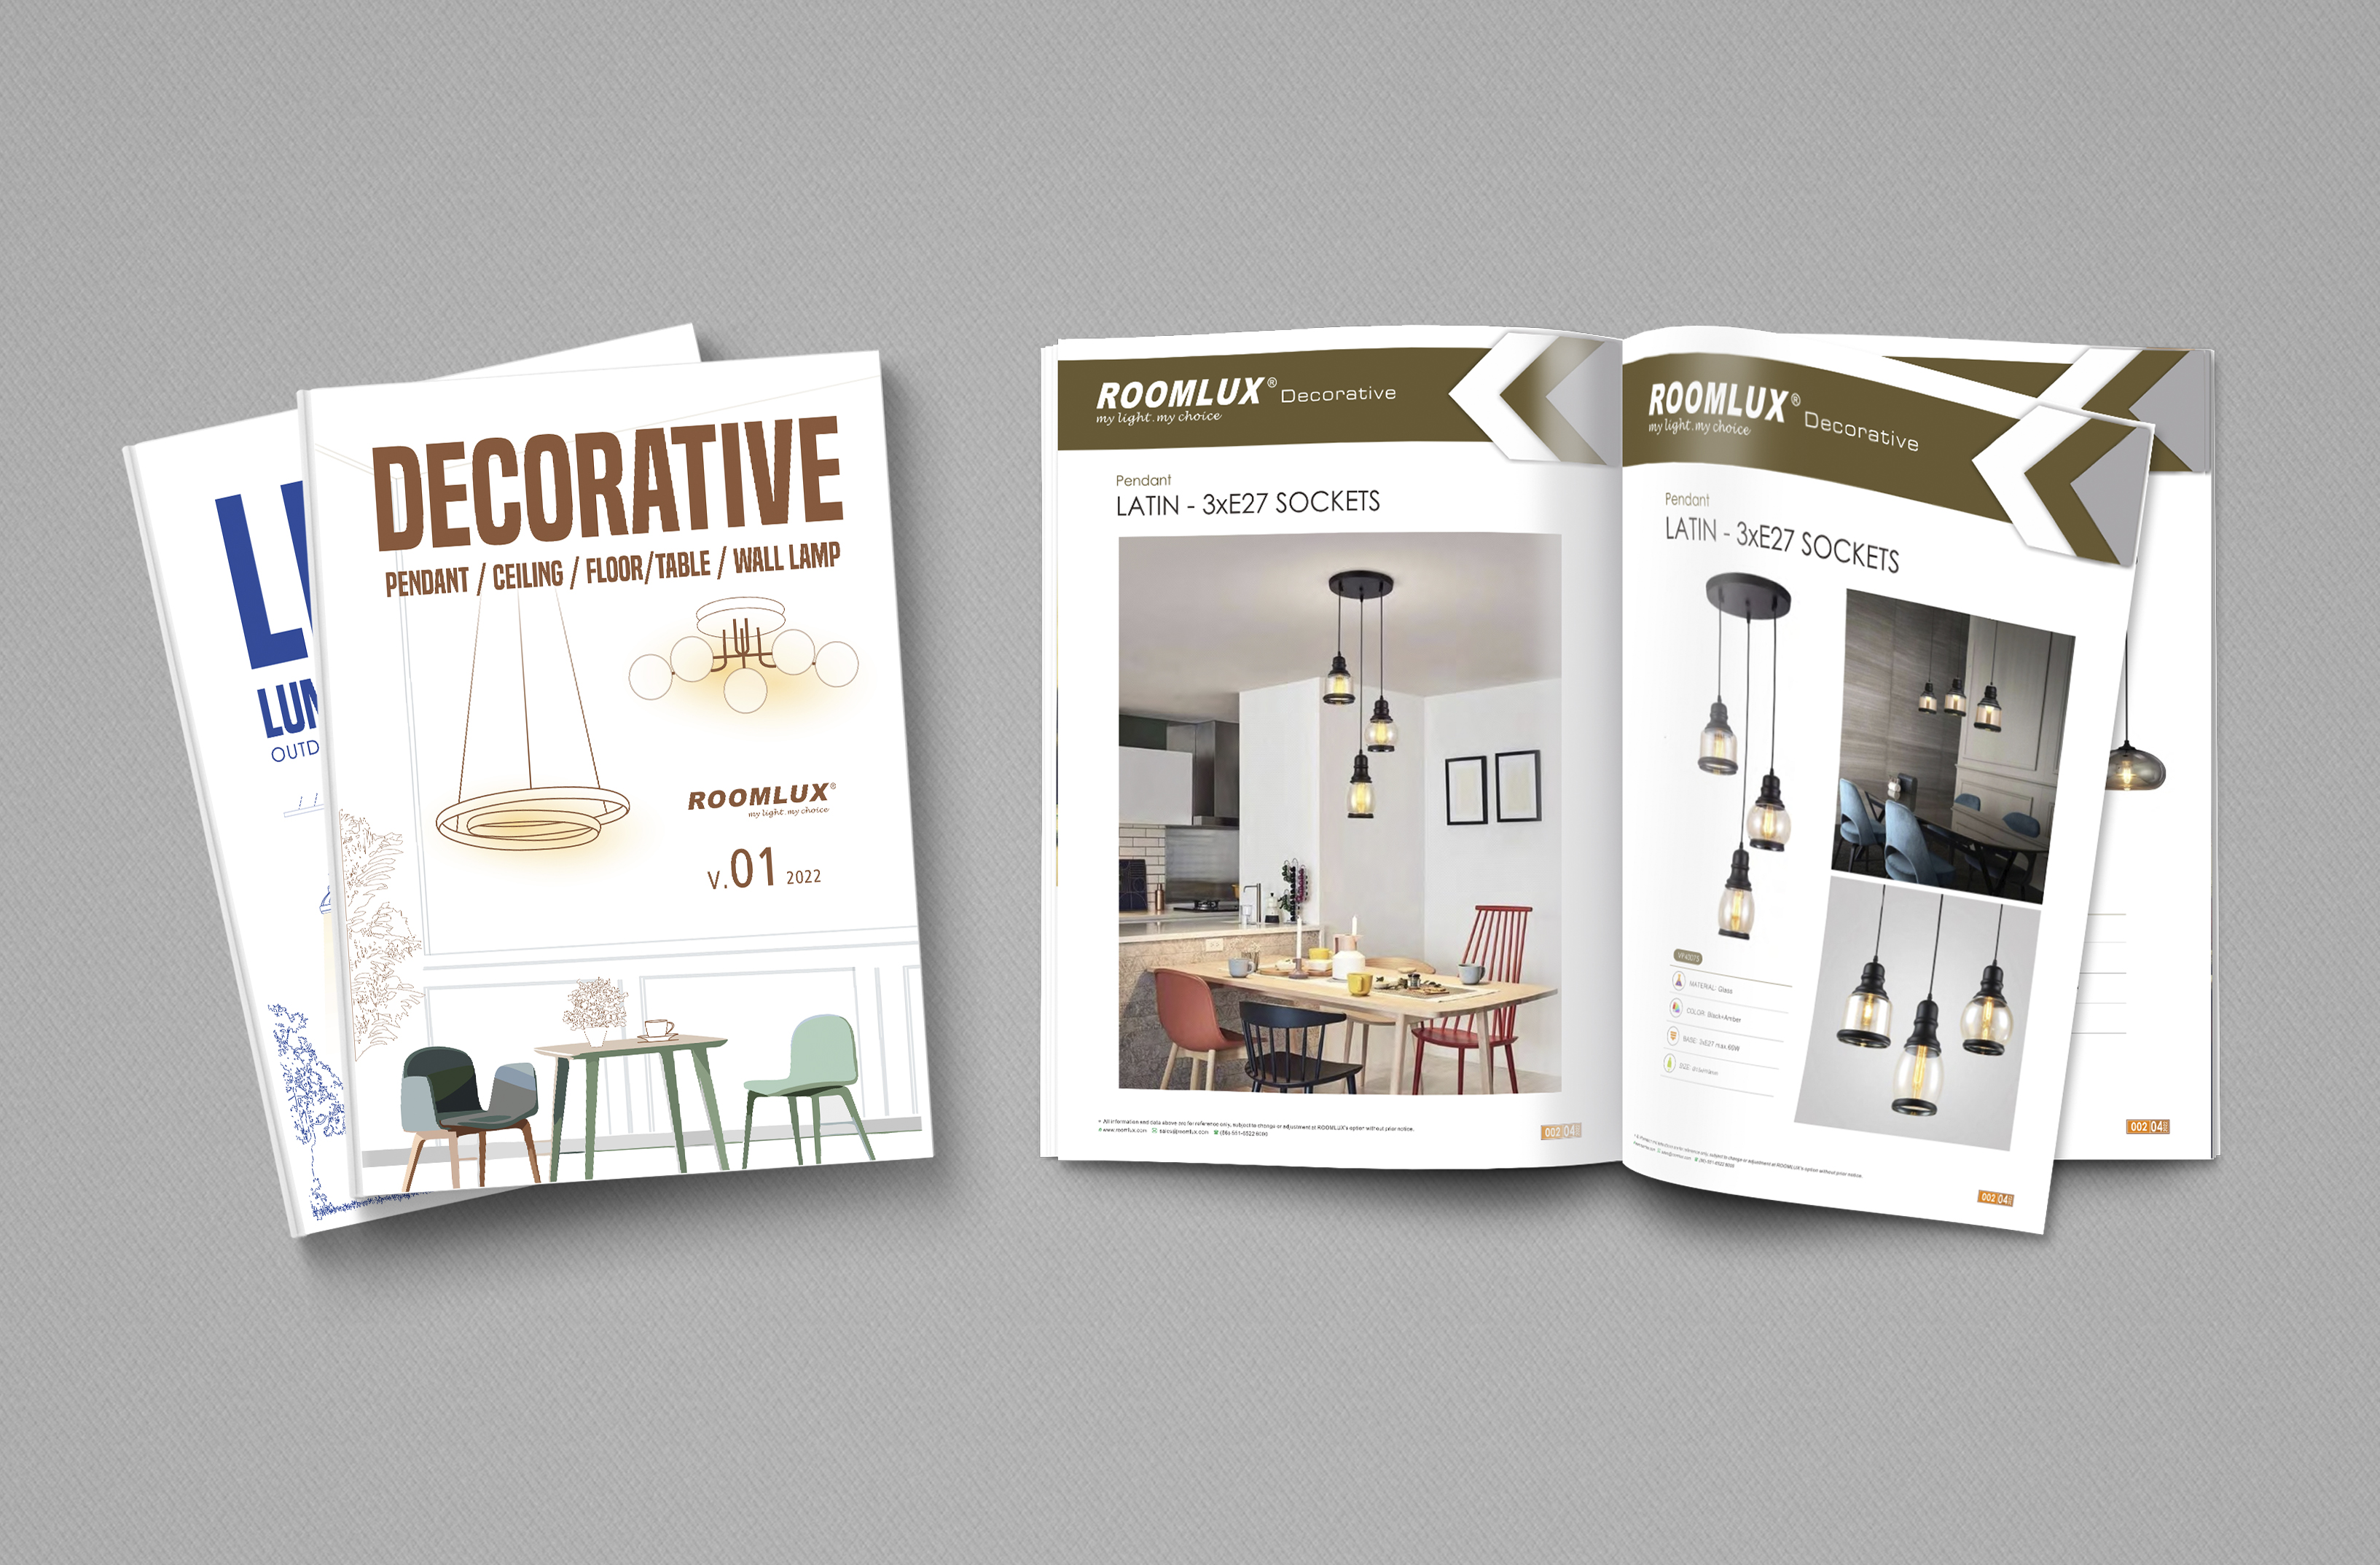 Roomlux latest e-catalogues is ready for download